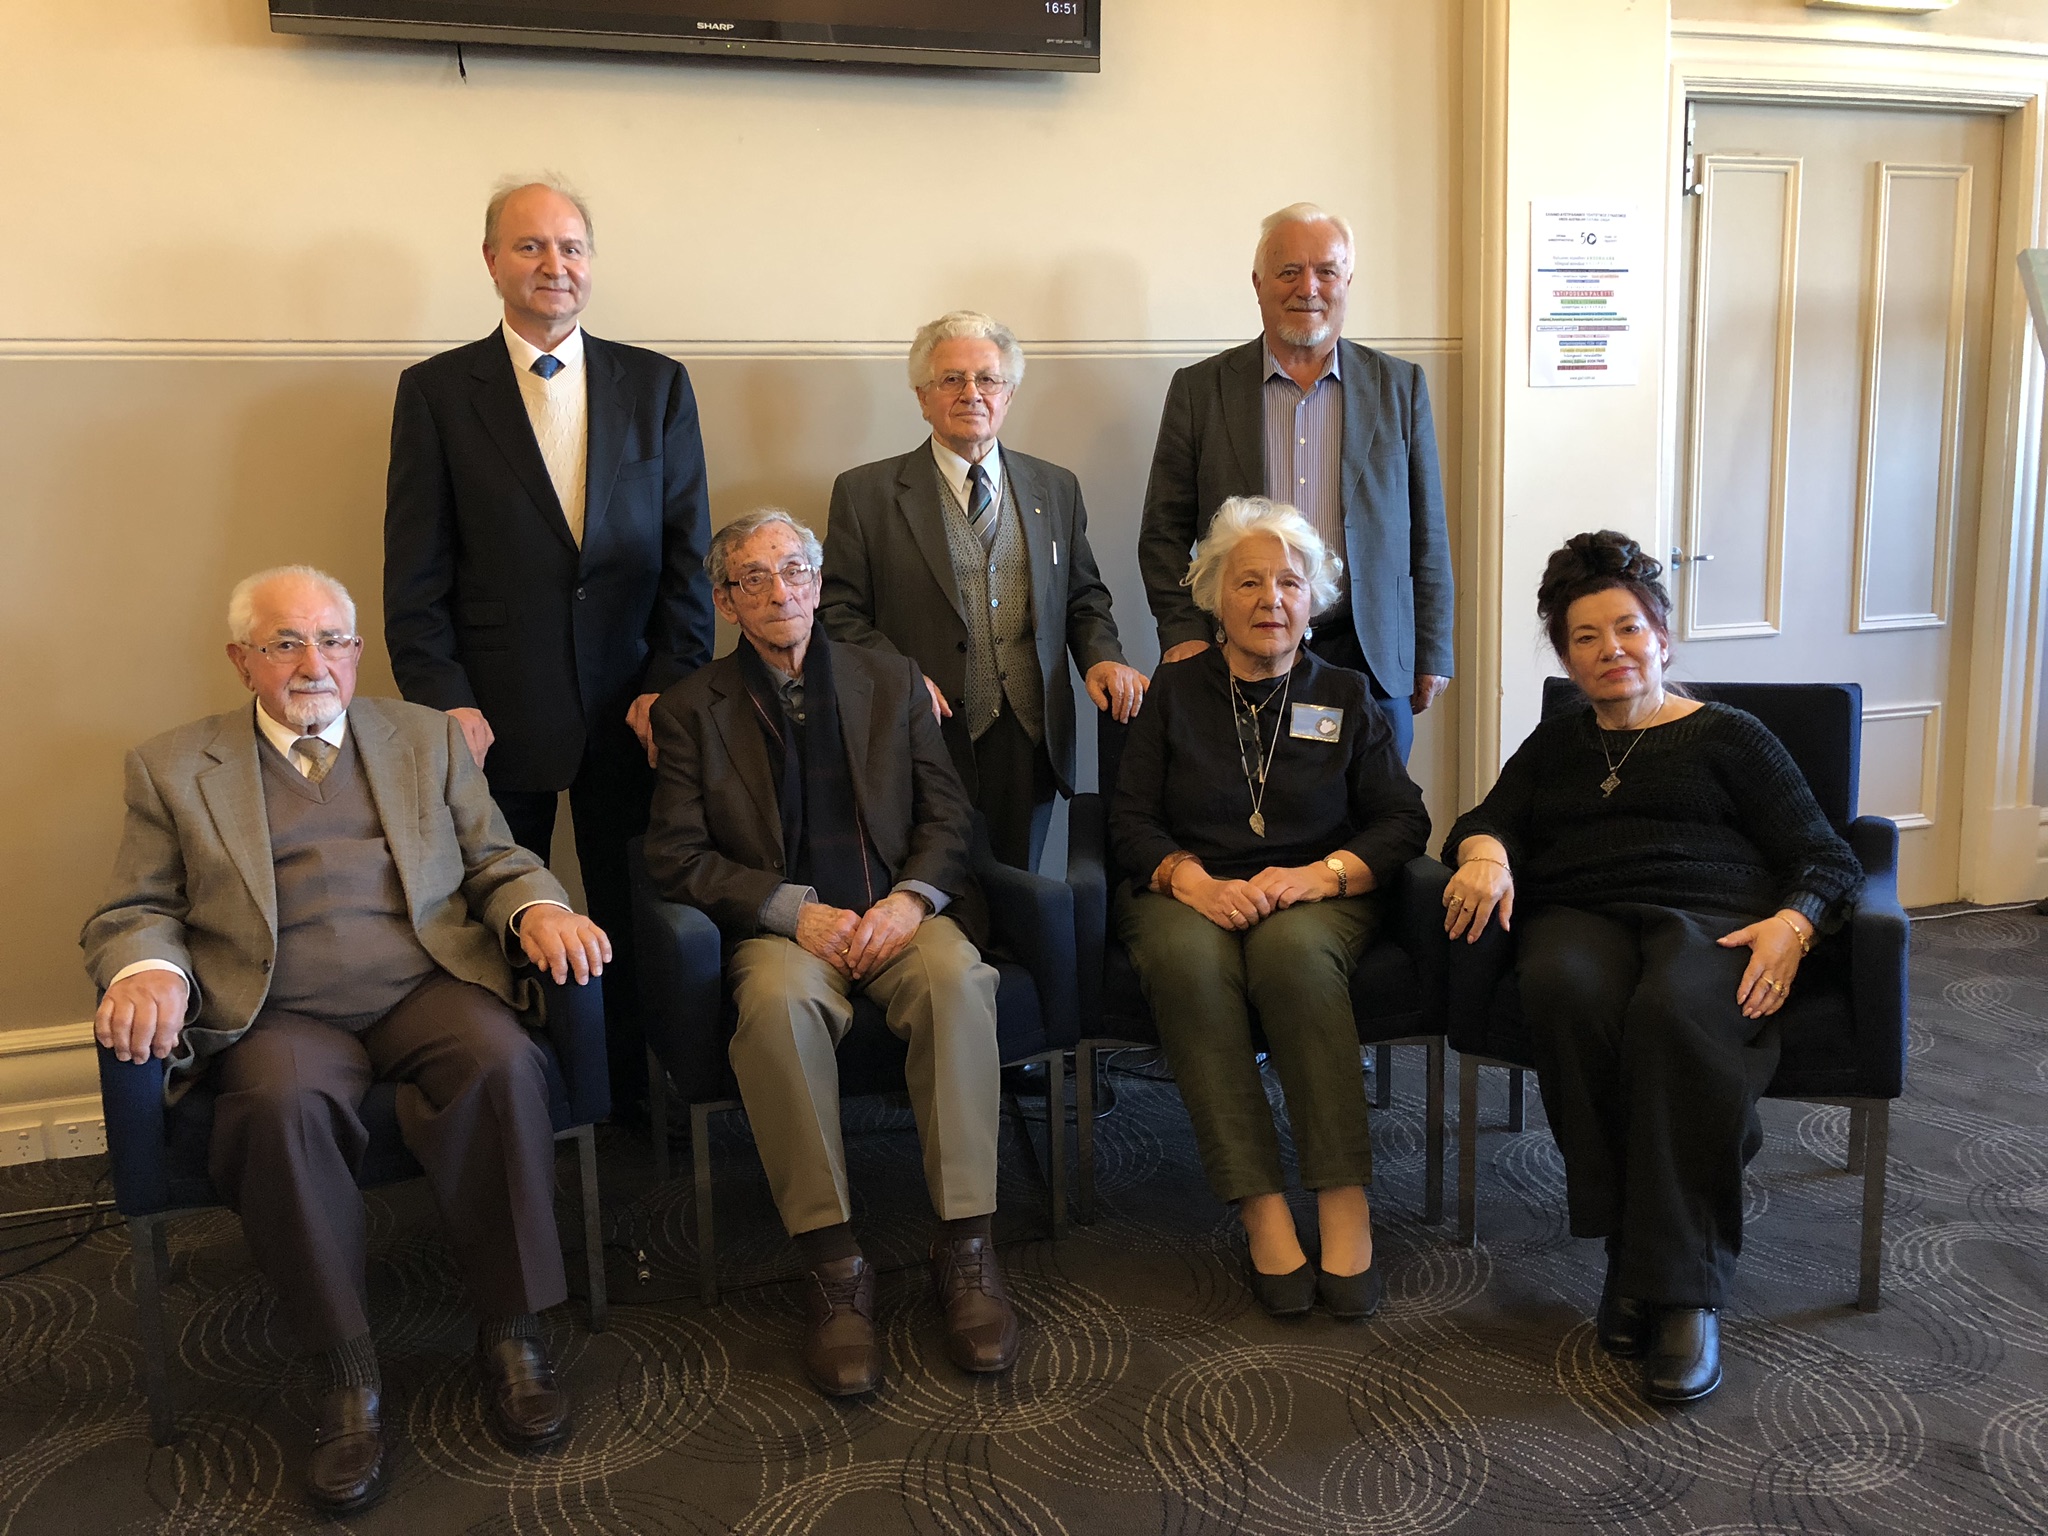 Founding members, past Presidents with current President 5